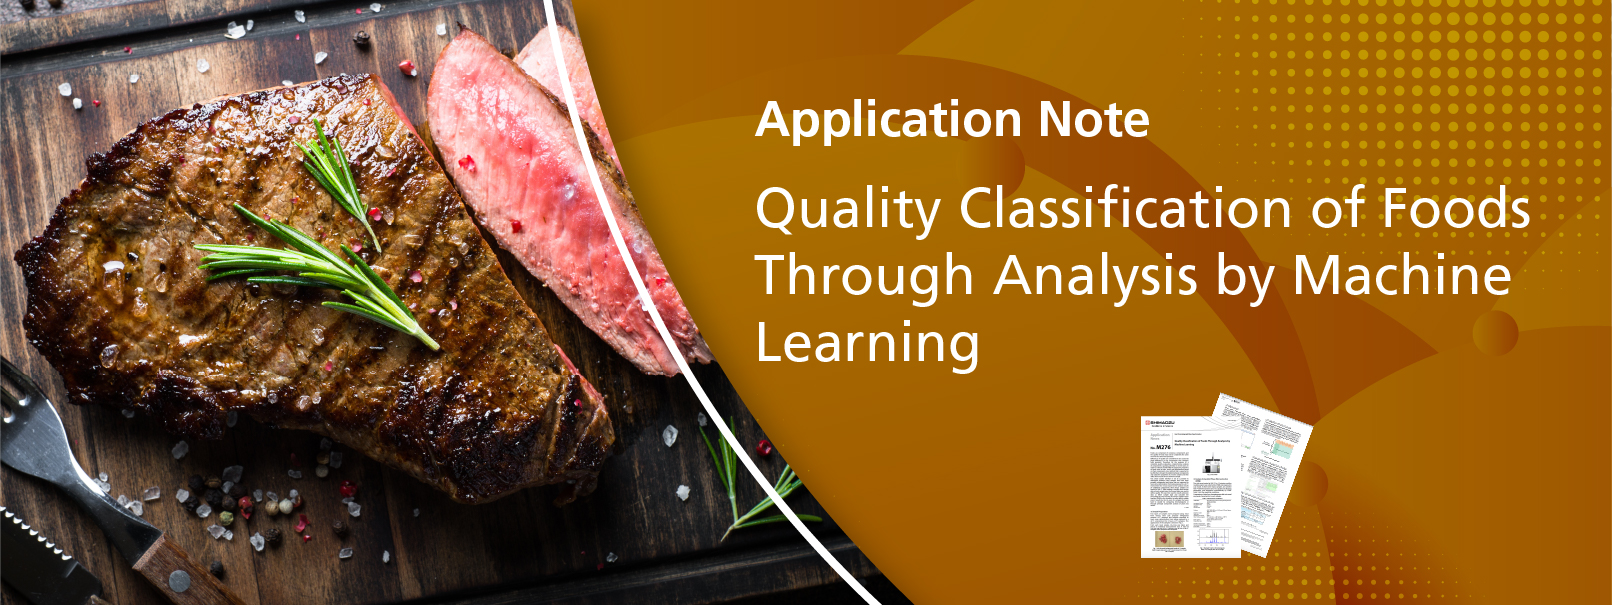 Quality Classification of Foods Through Analysis by Machine Learning